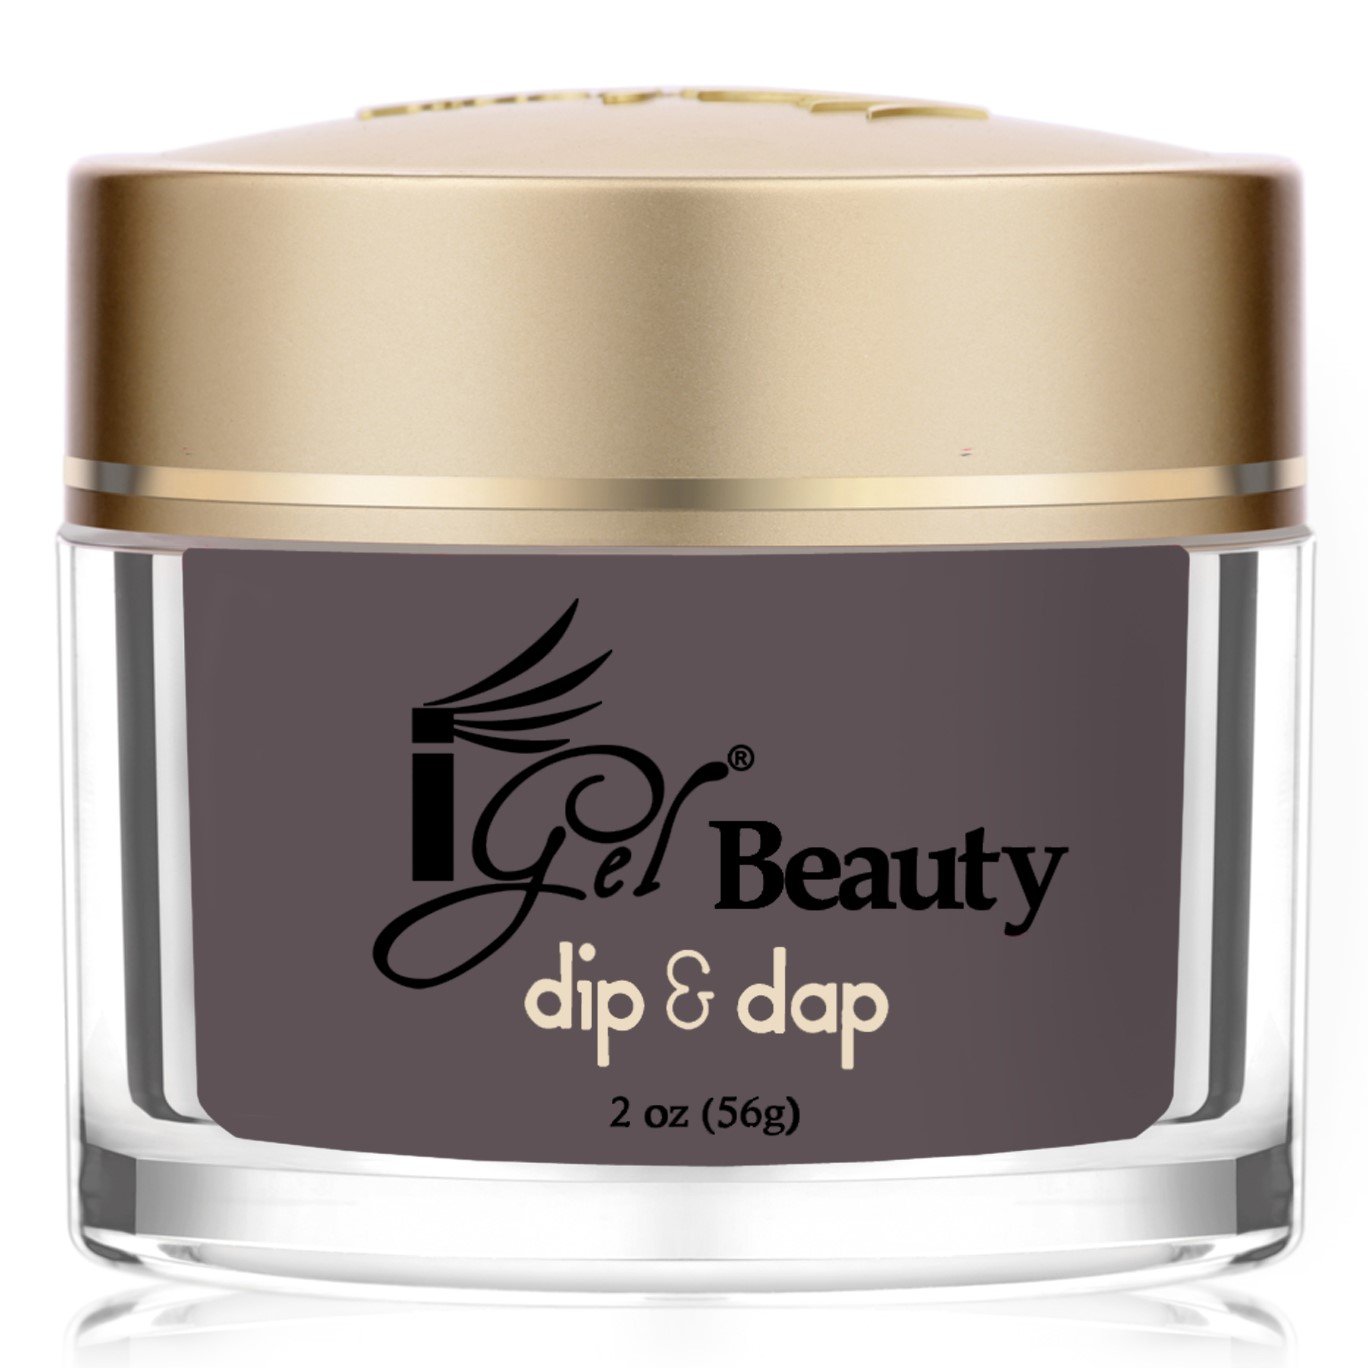 iGel Beauty - Dip & Dap Powder - DD079 Warm Chinchilla - RECOMMENDED FOR DIP